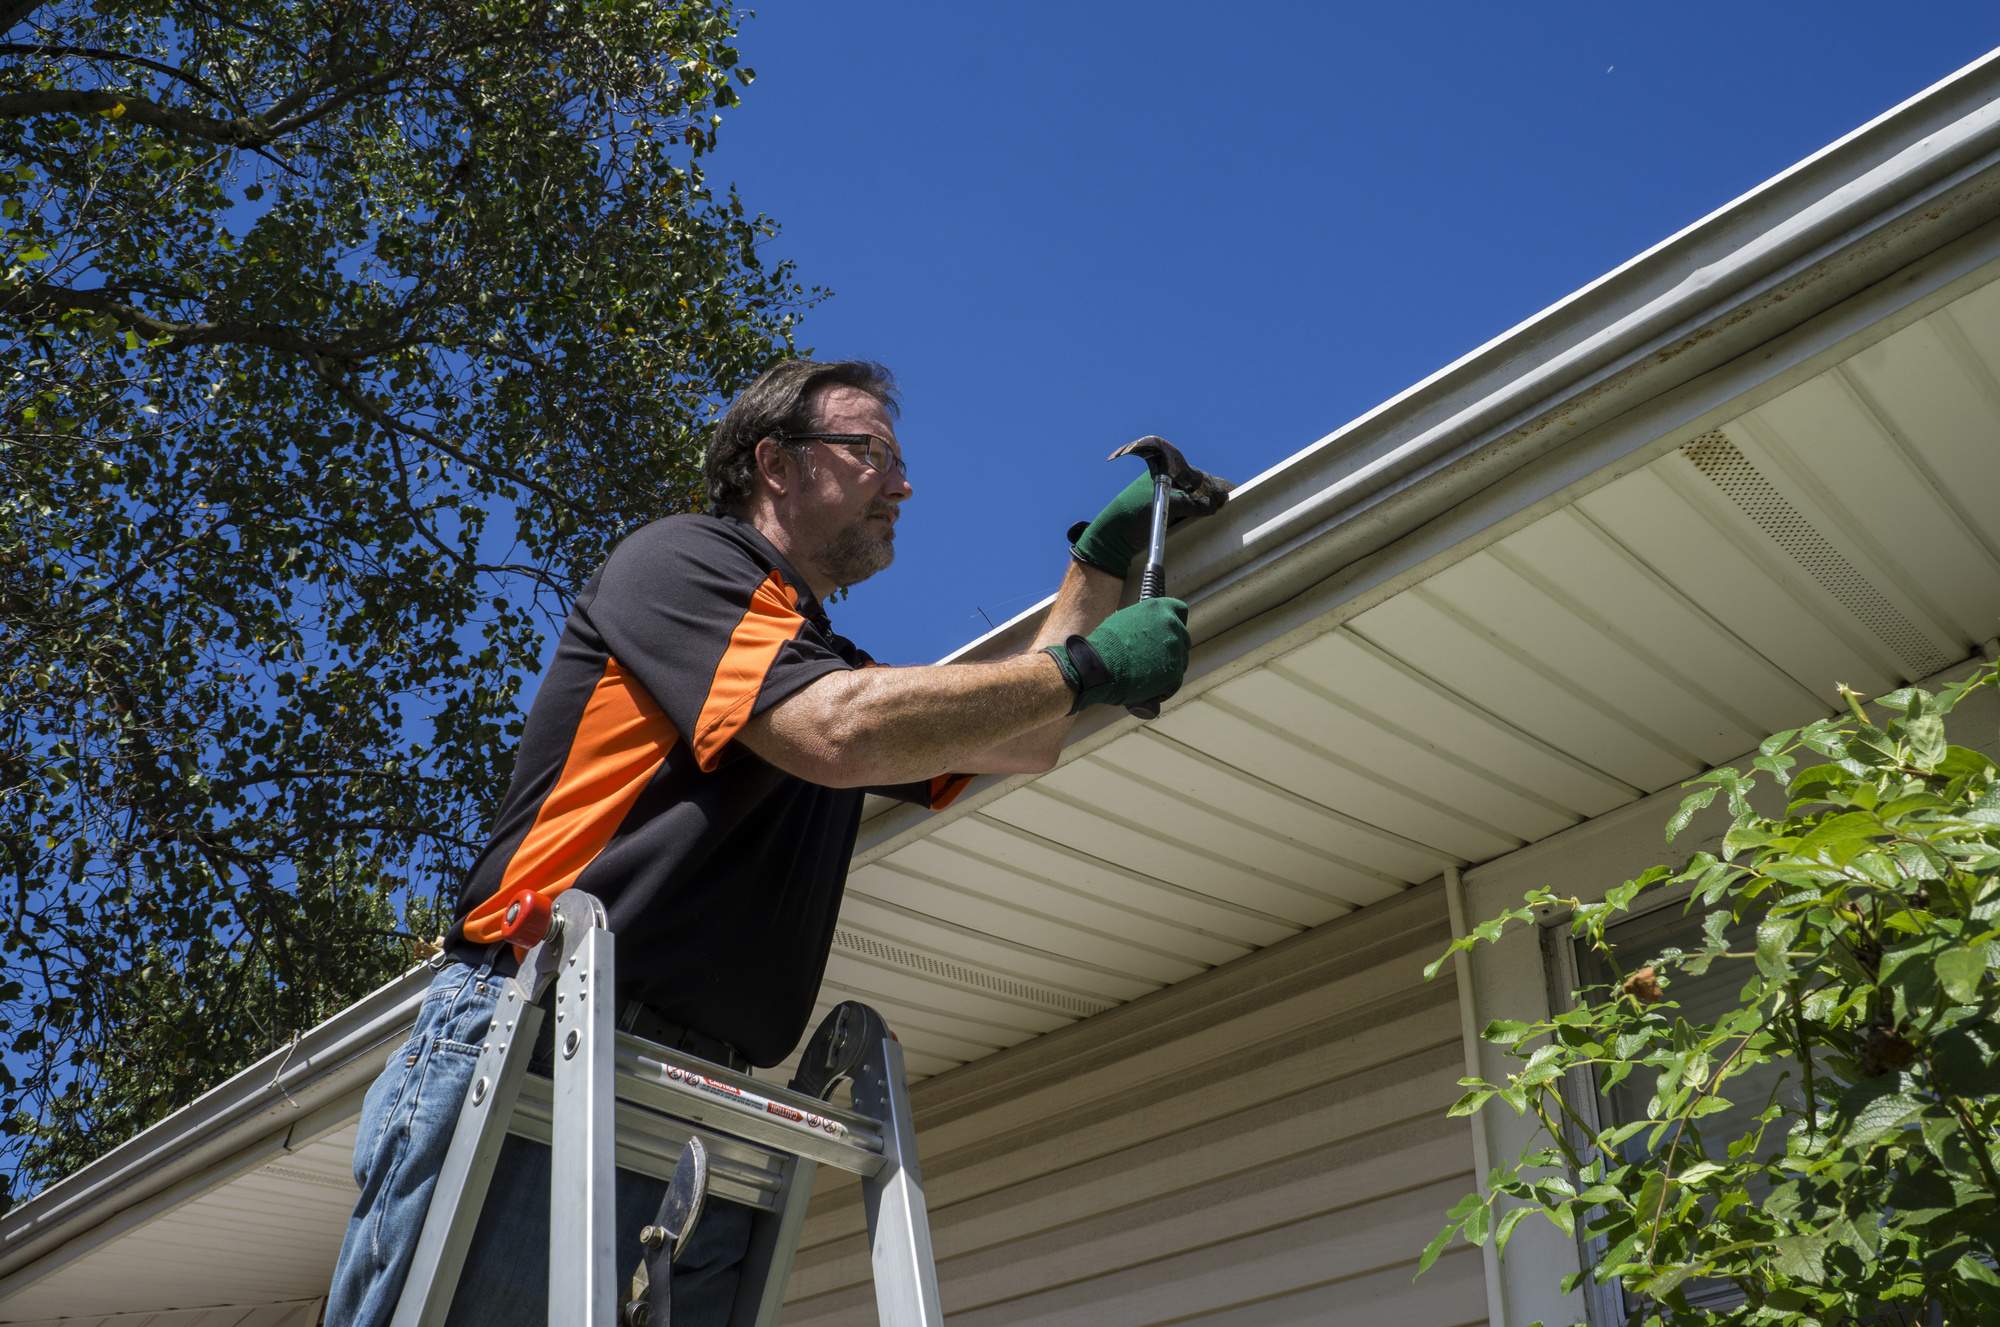 5 Tips for Choosing a Reliable Gutter Repair Company